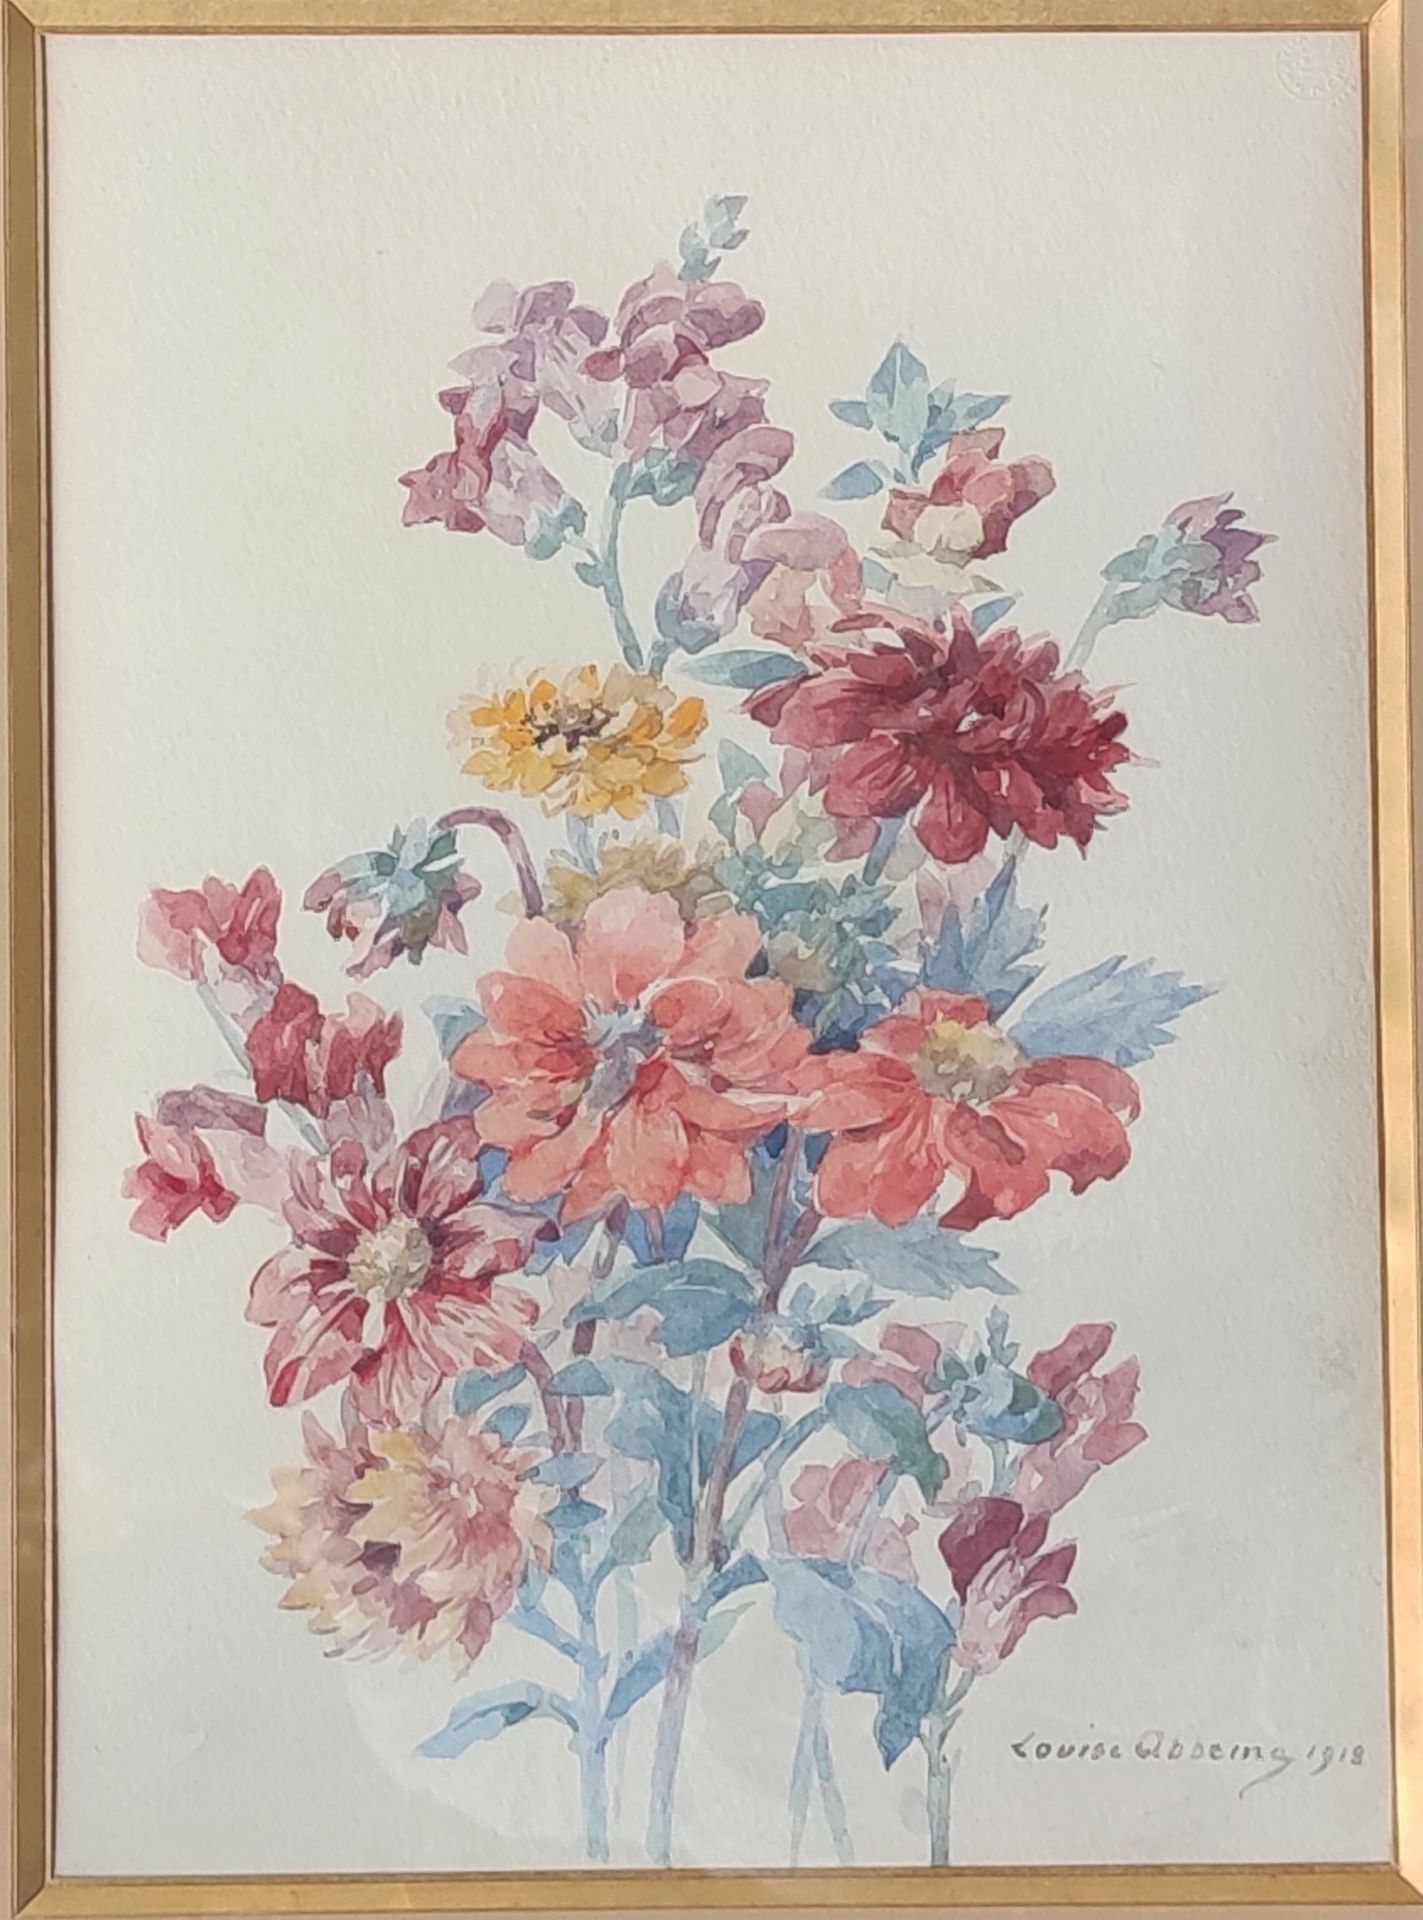 Null Louise ABBÉMA (1858-1927)

Flower Throwing, 1918

Watercolor signed and dat&hellip;